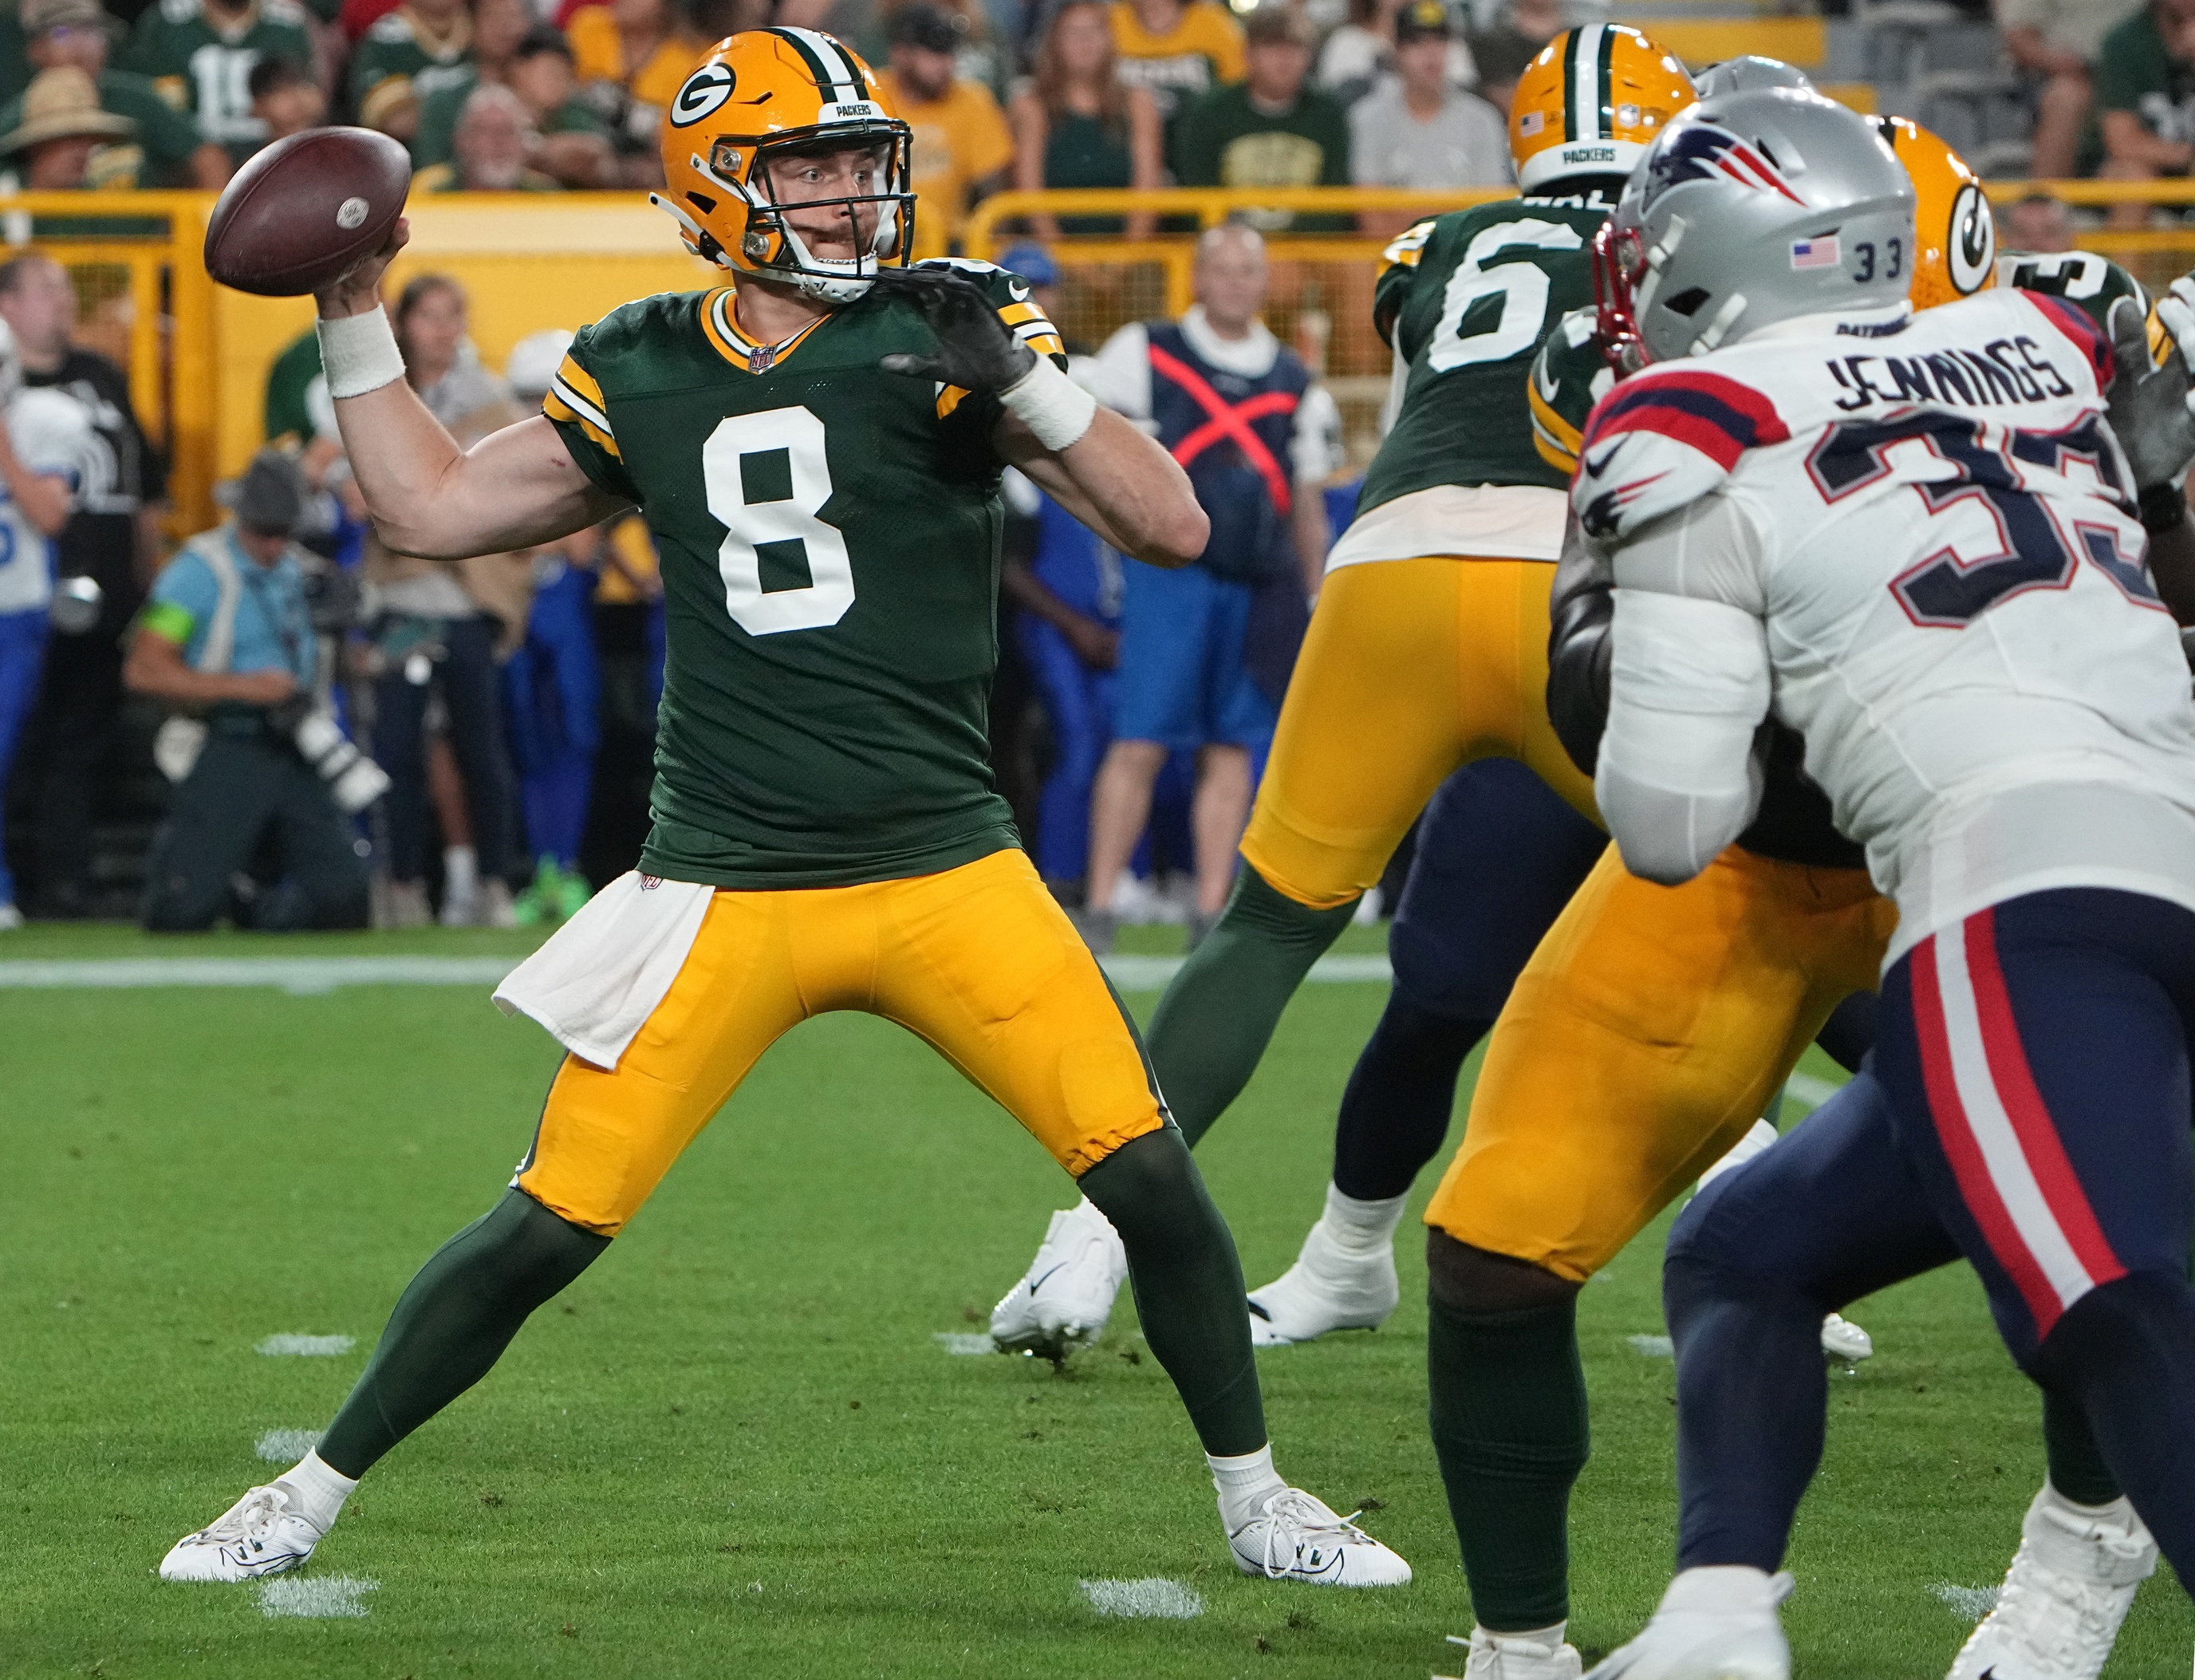 Packers QB Sean Clifford Has Surprised a Lot of People in Camp This Year